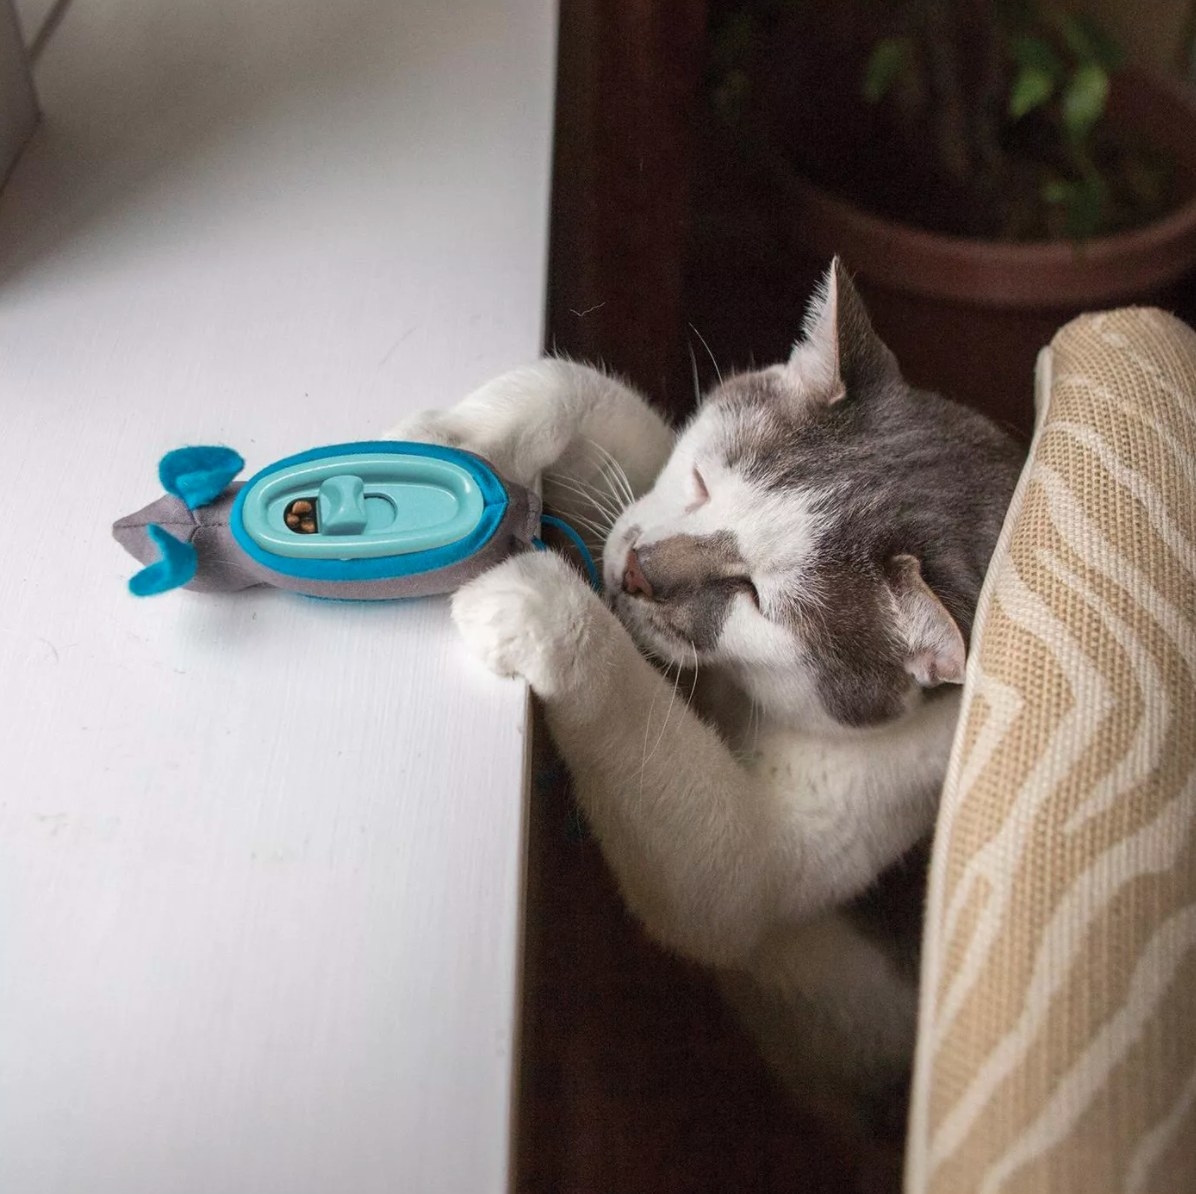 The ethical hunting toy being used by a cat